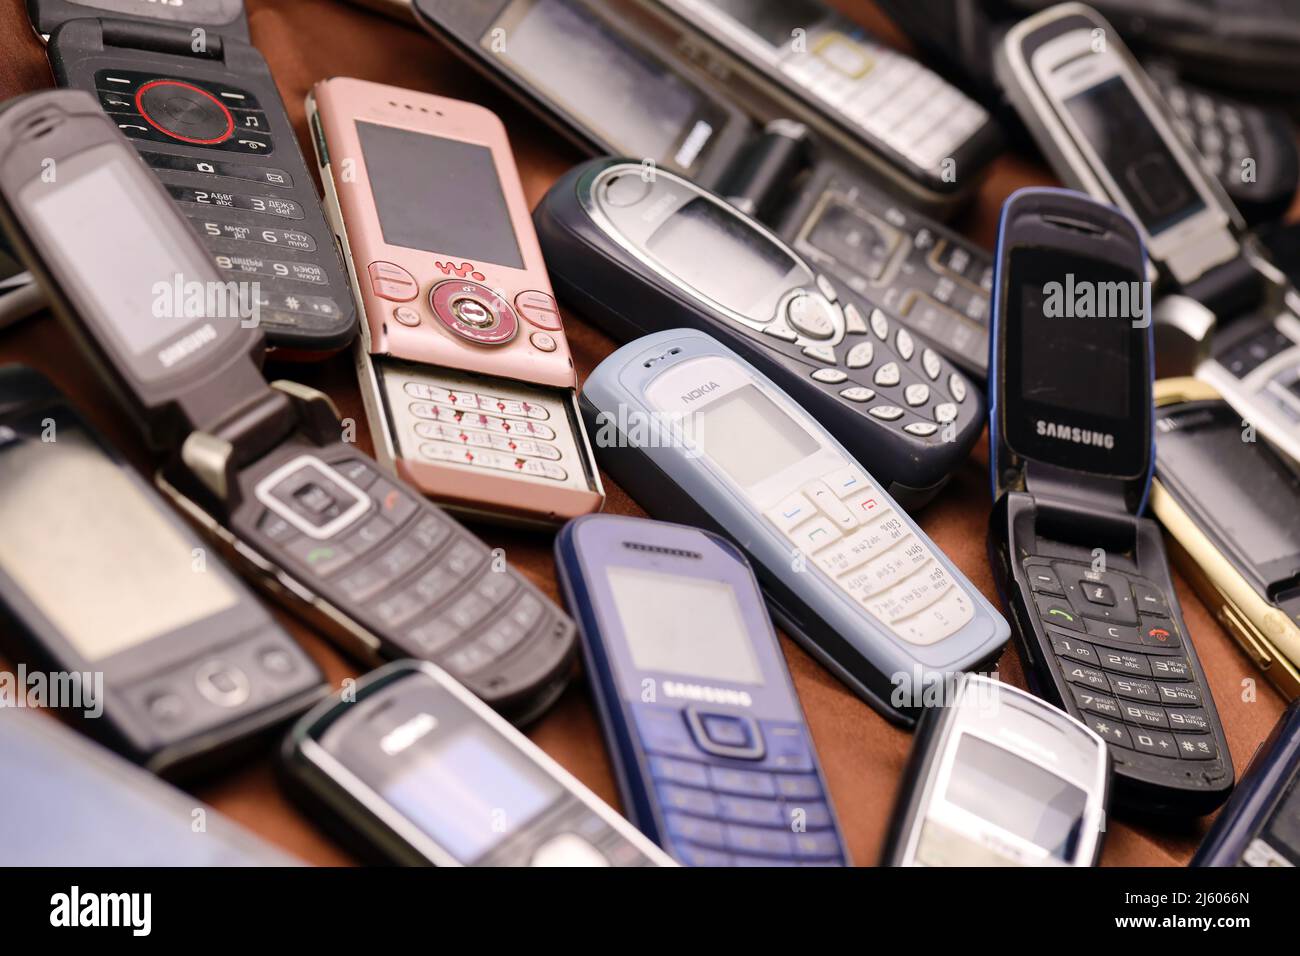 KHARKIV, UKRAINE - DECEMBER 16, 2021: Some old used outdated mobile phones from 90s-2000s period. Recycling electronics in the market cheap Stock Photo